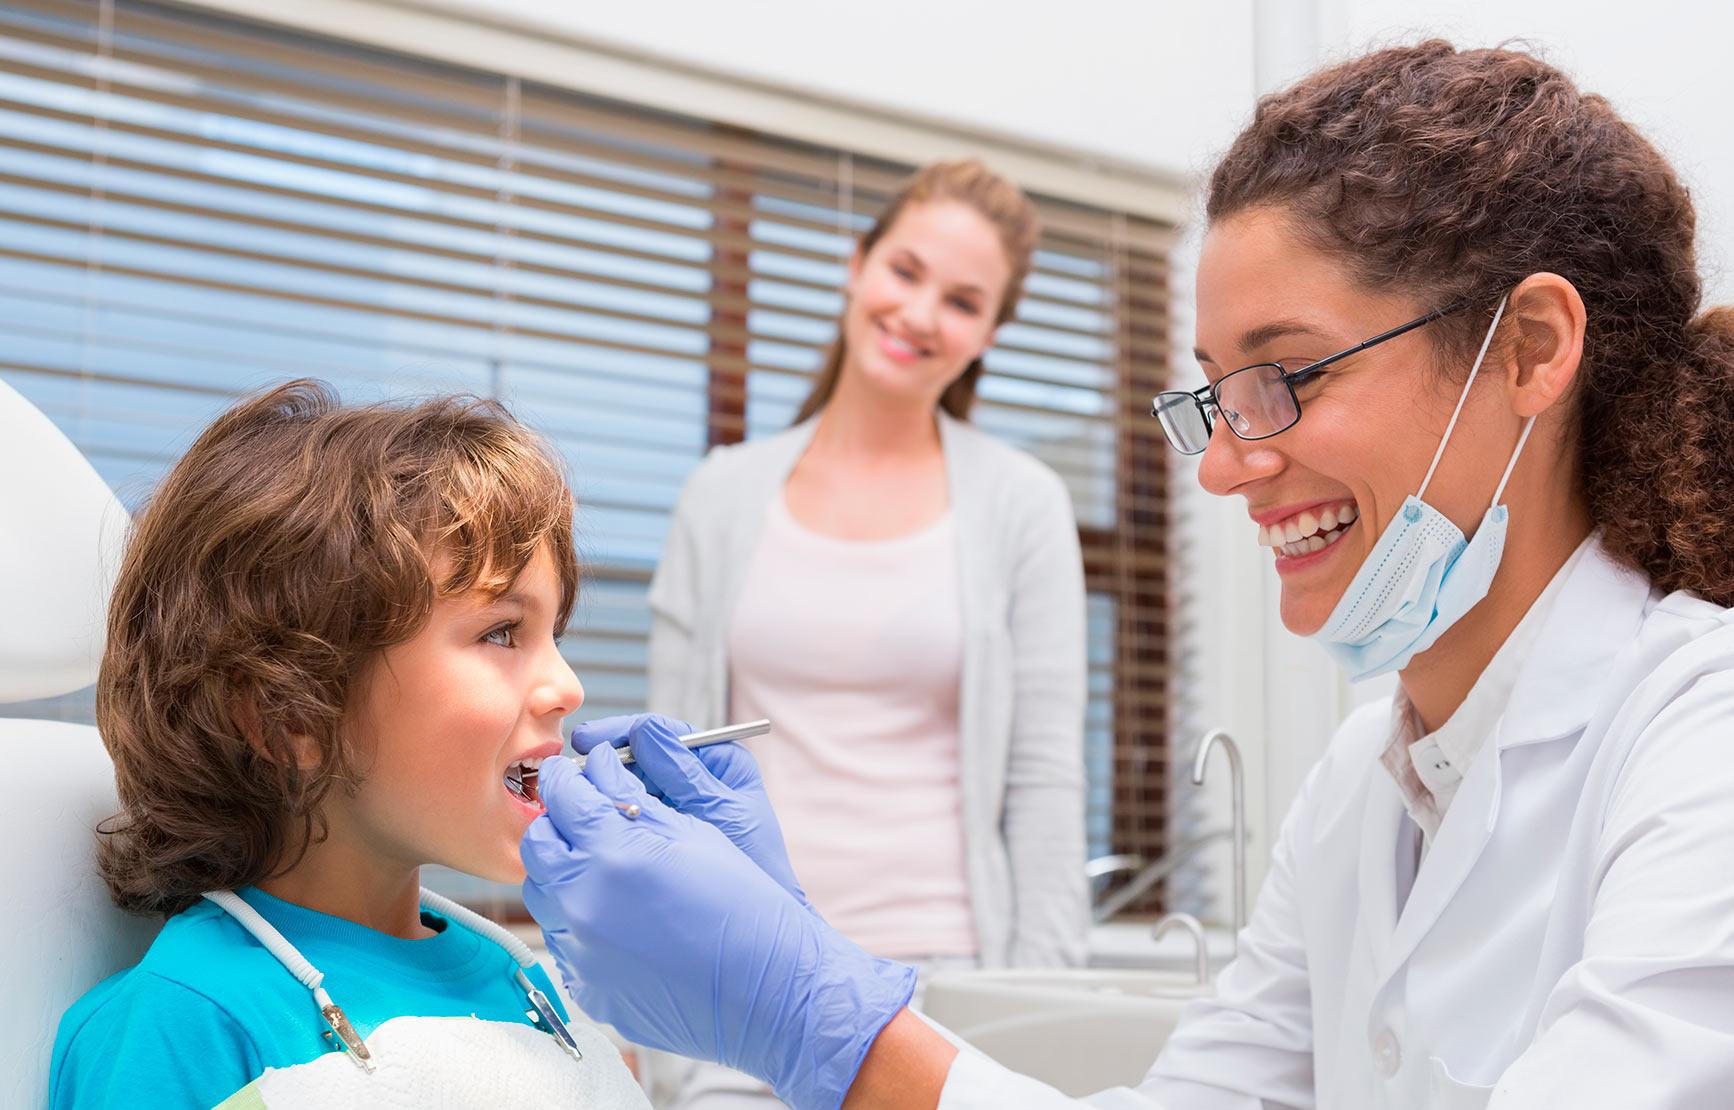 Dentist working on child's mouth next to mother.